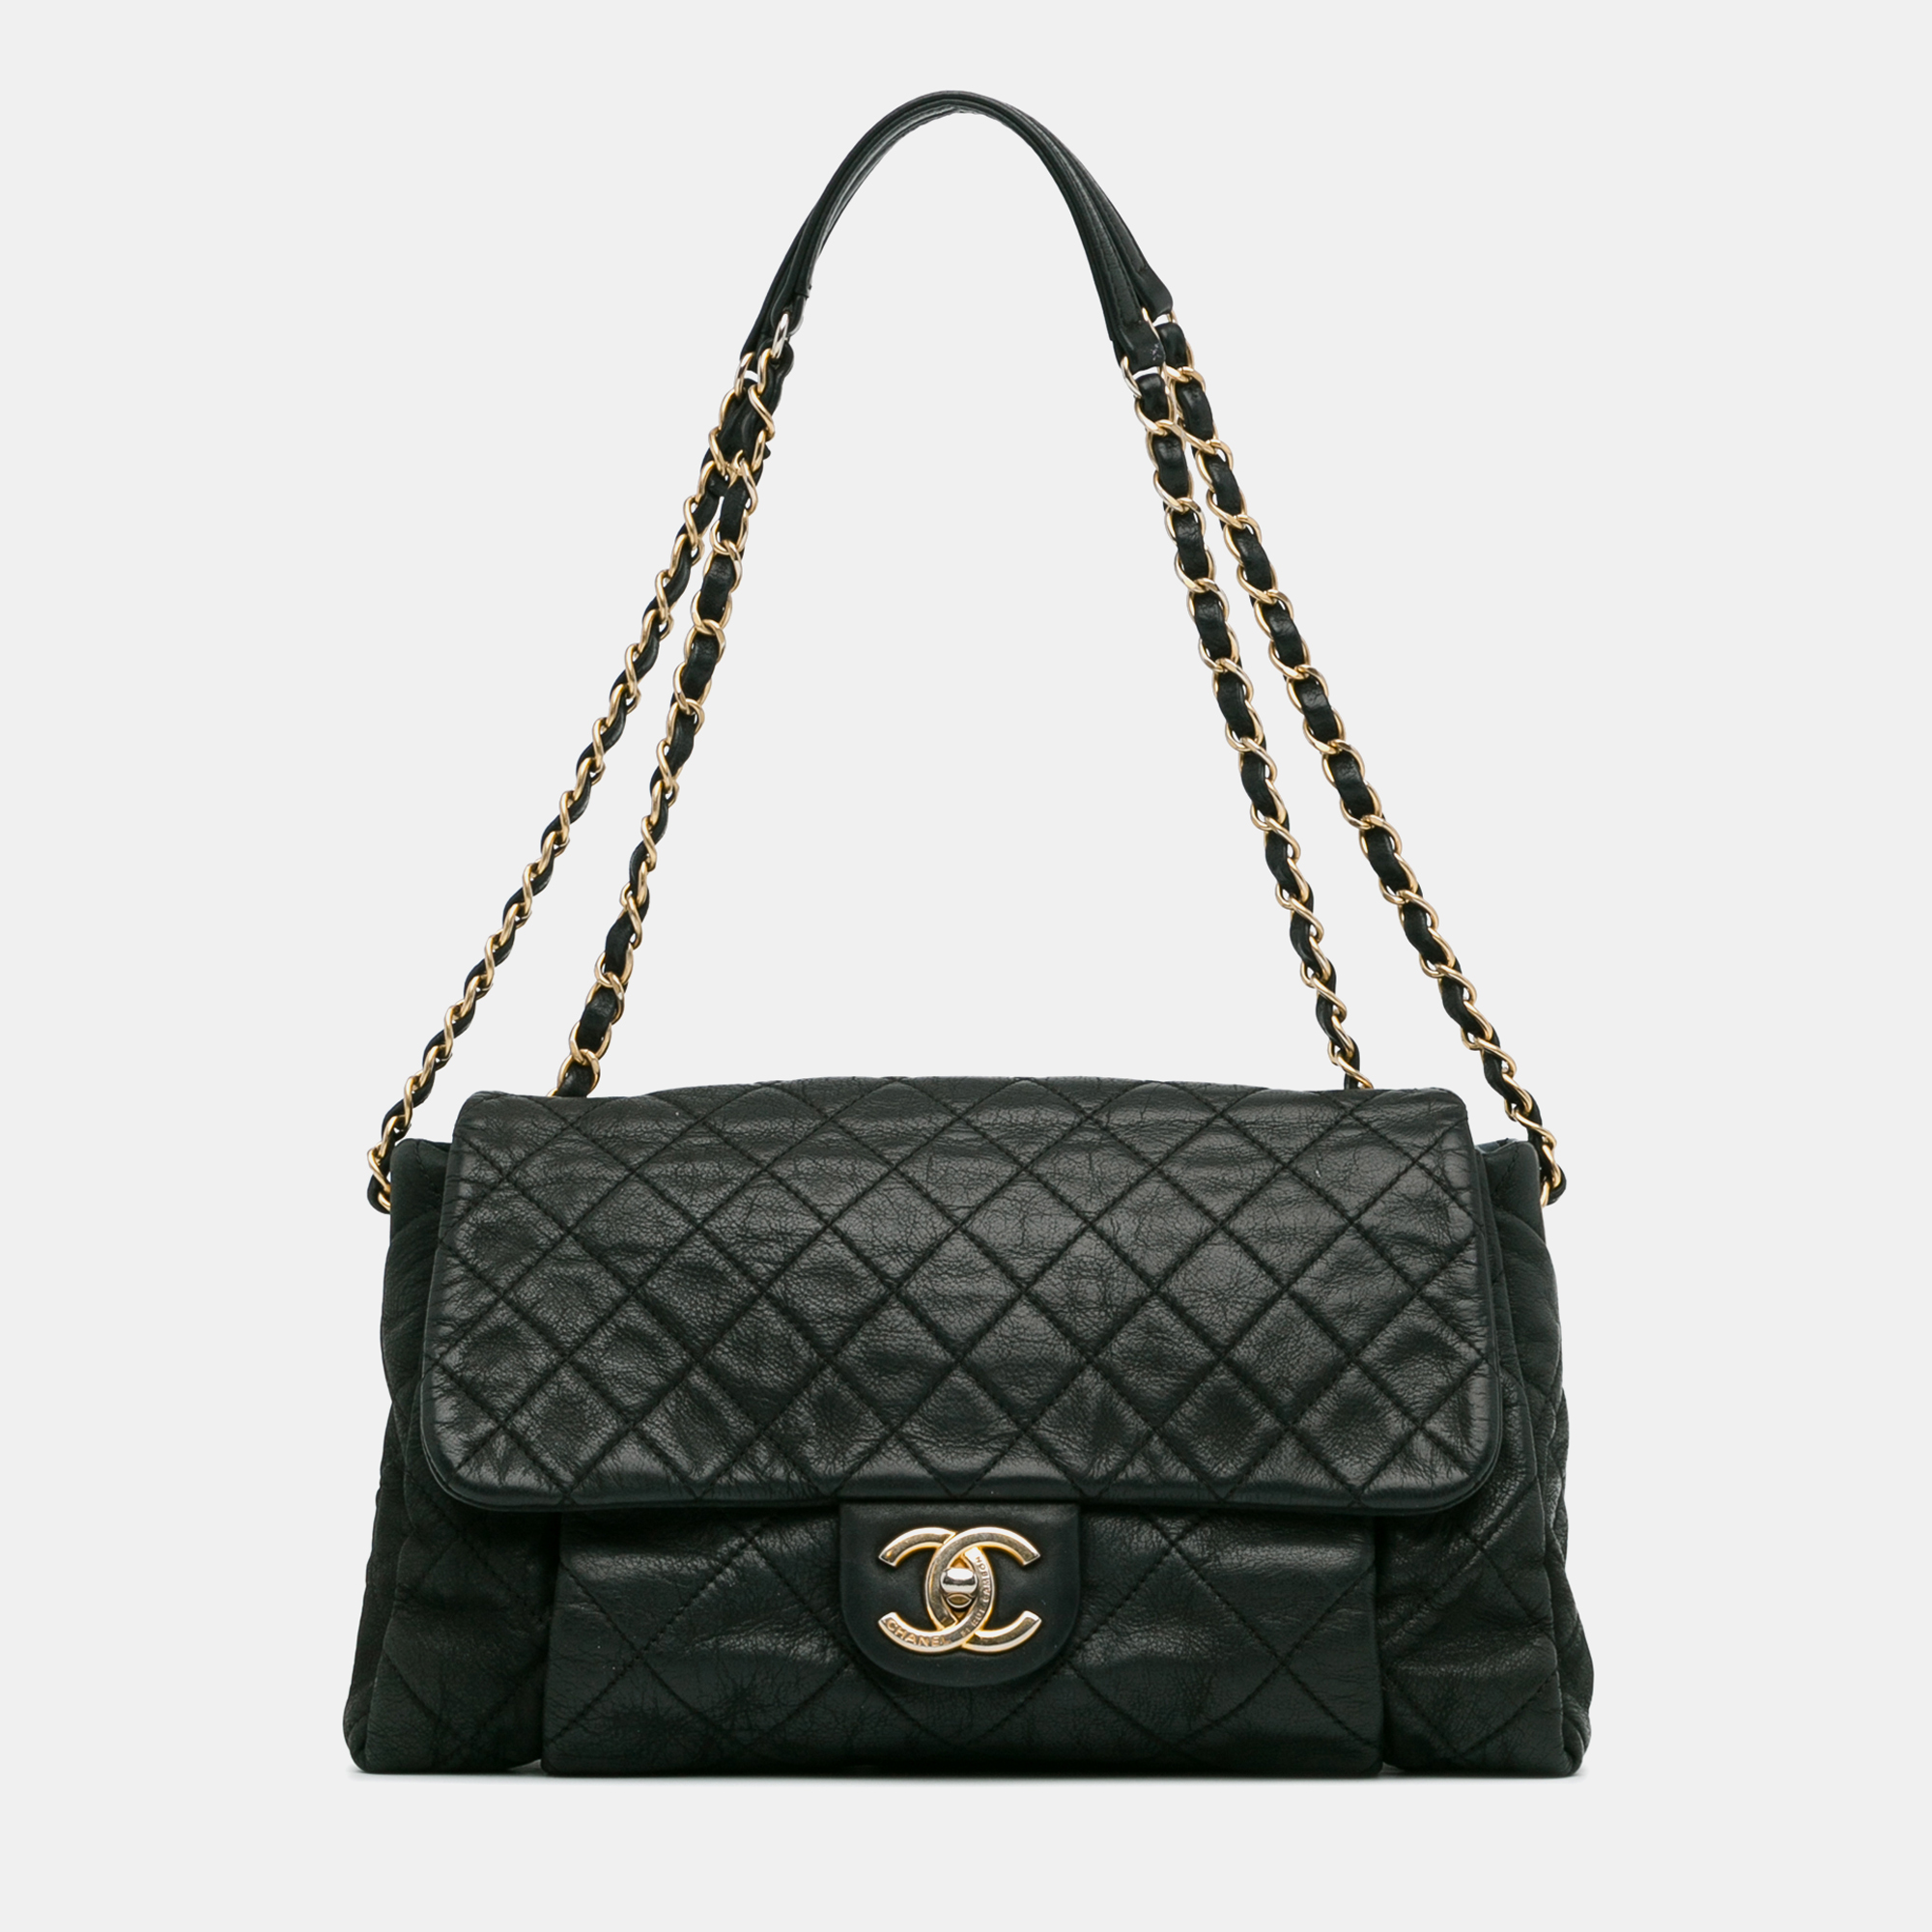 Chanel large calfskin chic quilt flap